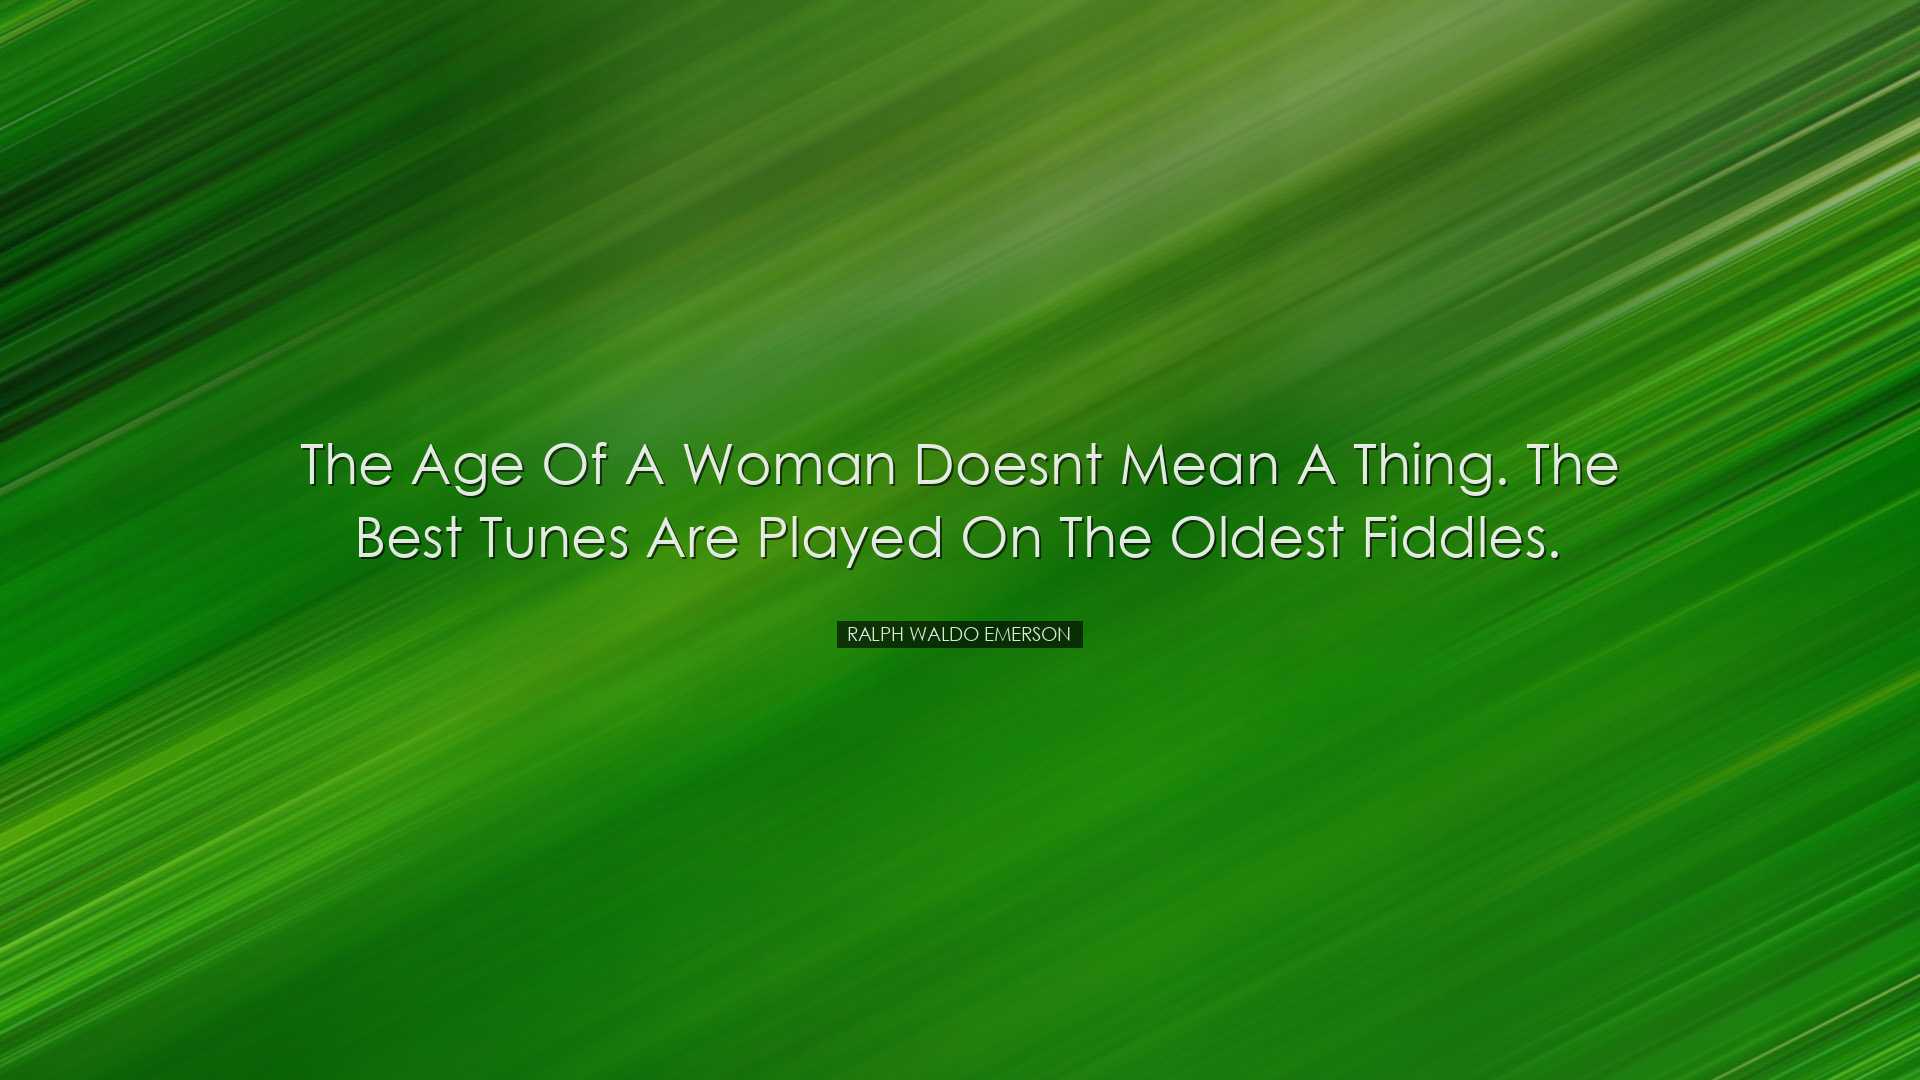 The age of a woman doesnt mean a thing. The best tunes are played